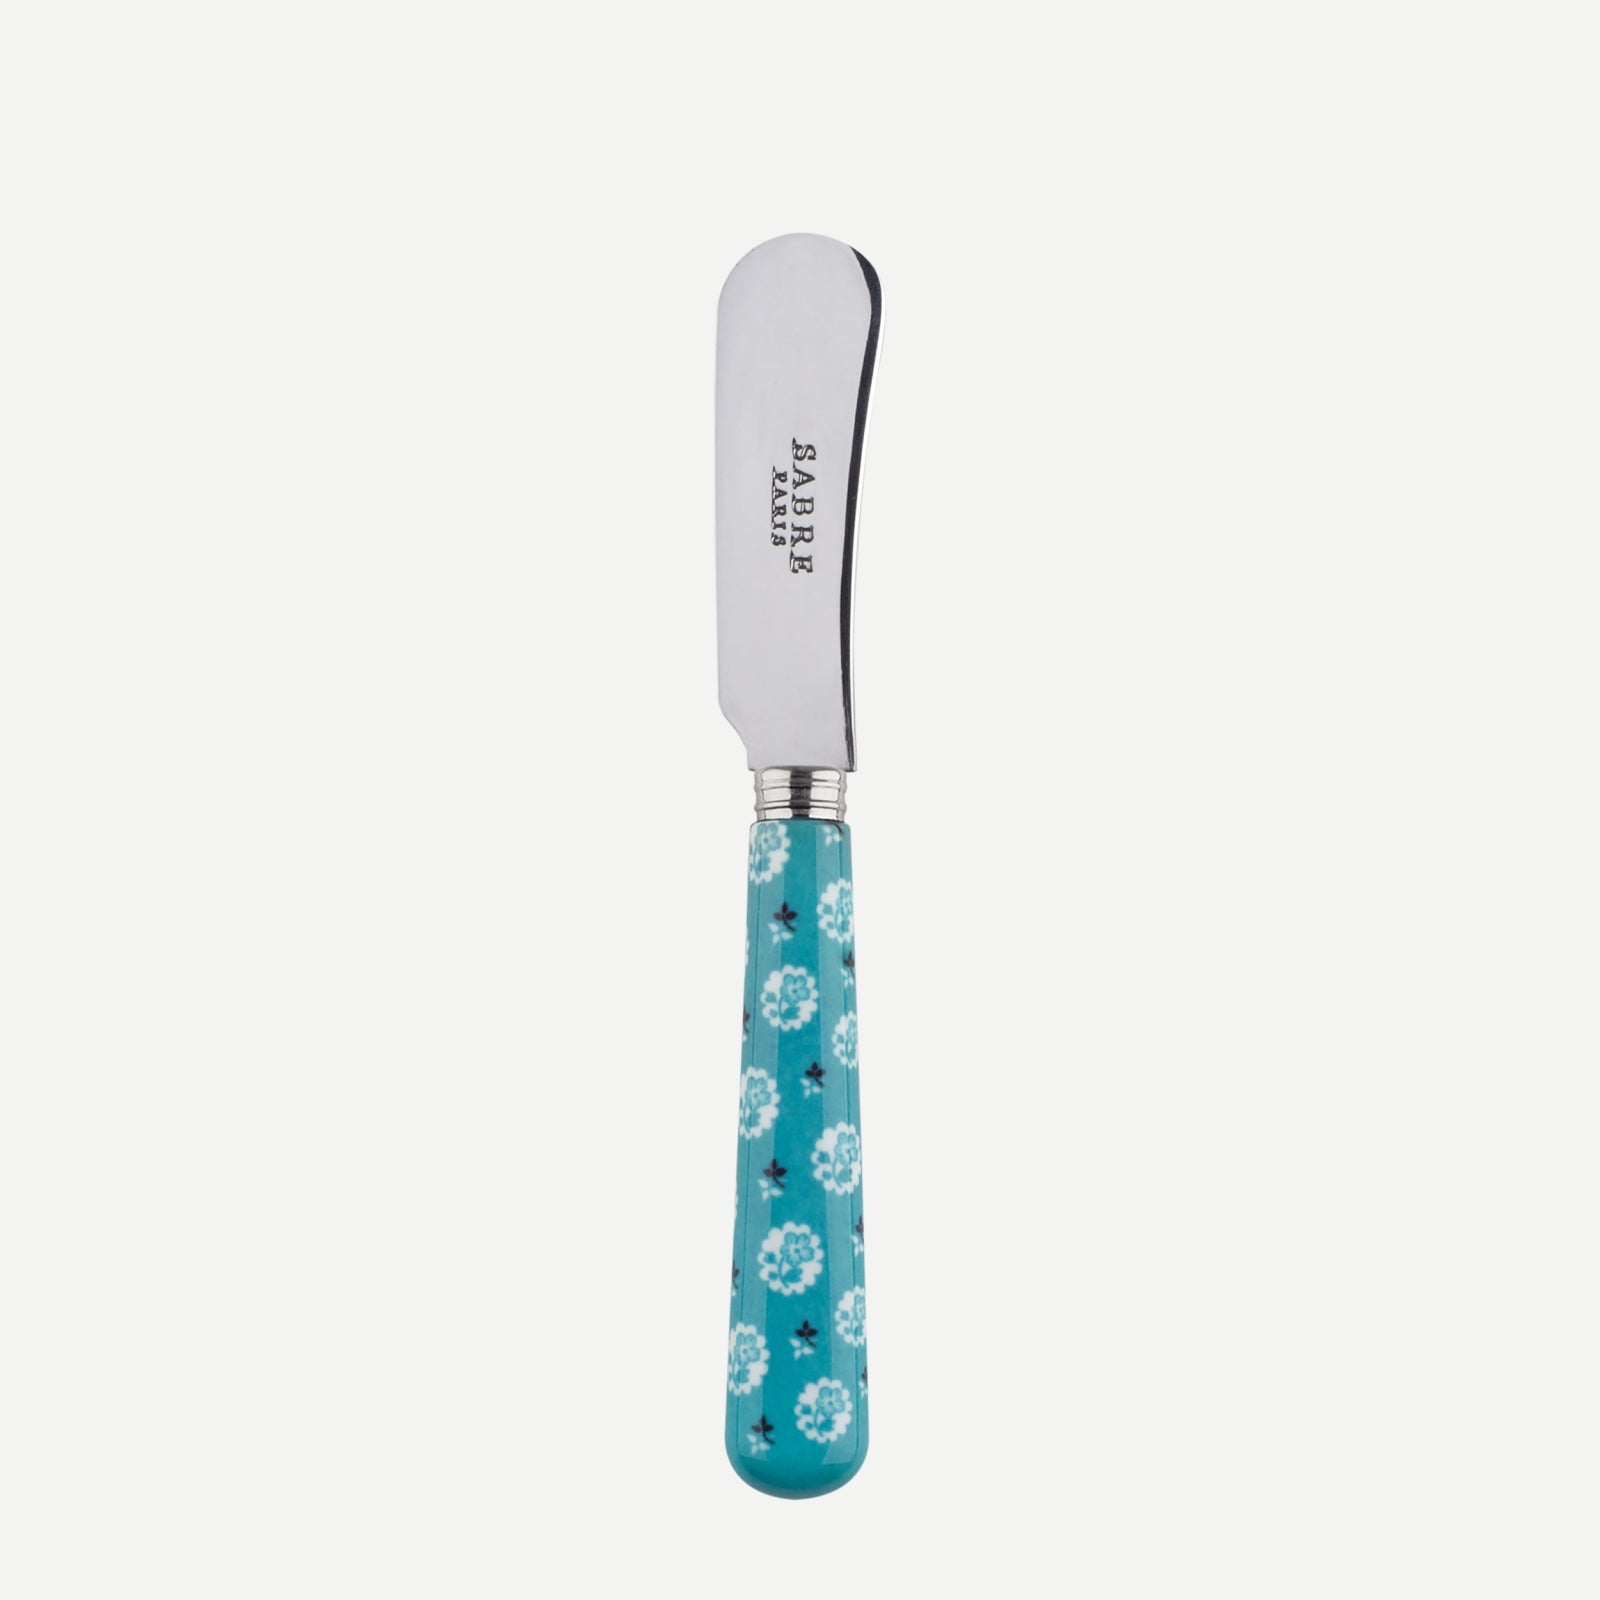 Butter spreader - Provencal - Turquoise